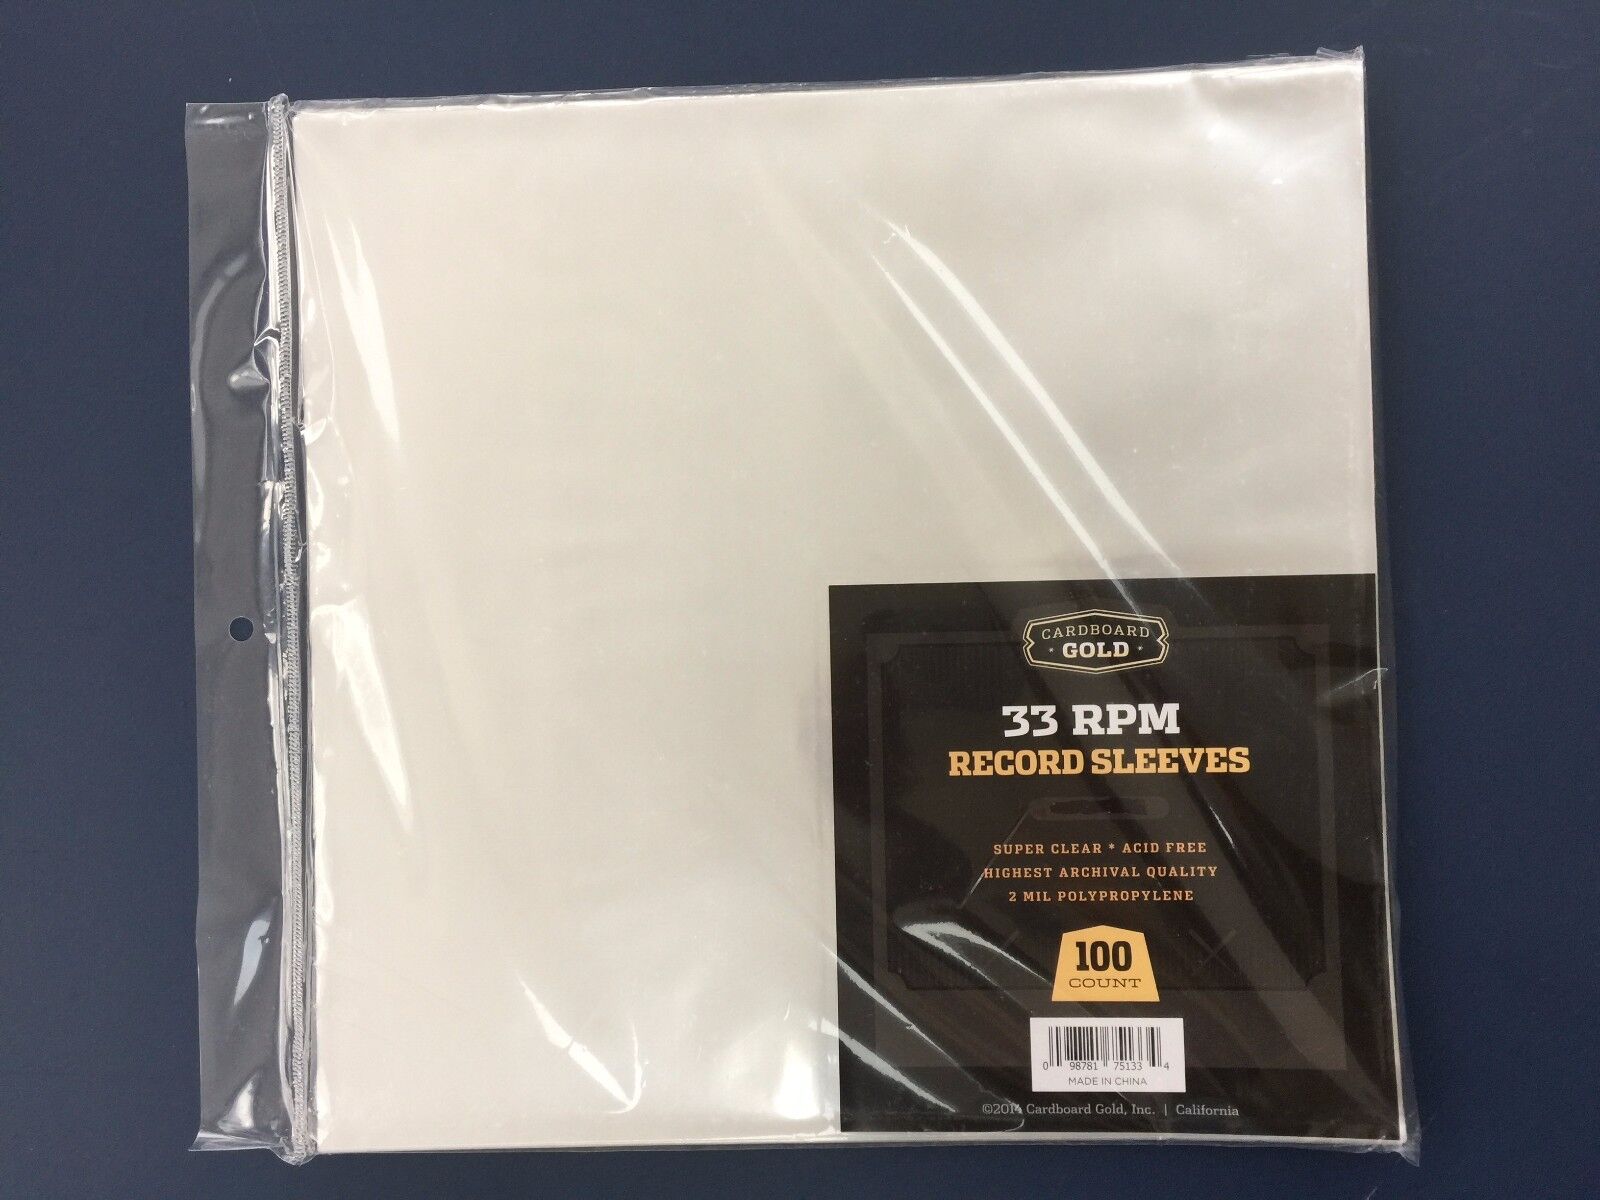 500 Clear Poly Plastic LP Outer Sleeves 2 Mil 12" Vinyl 33rpm Record Album Cover Card Board Gold 33 RPM RECORD SLEEVES - фотография #3